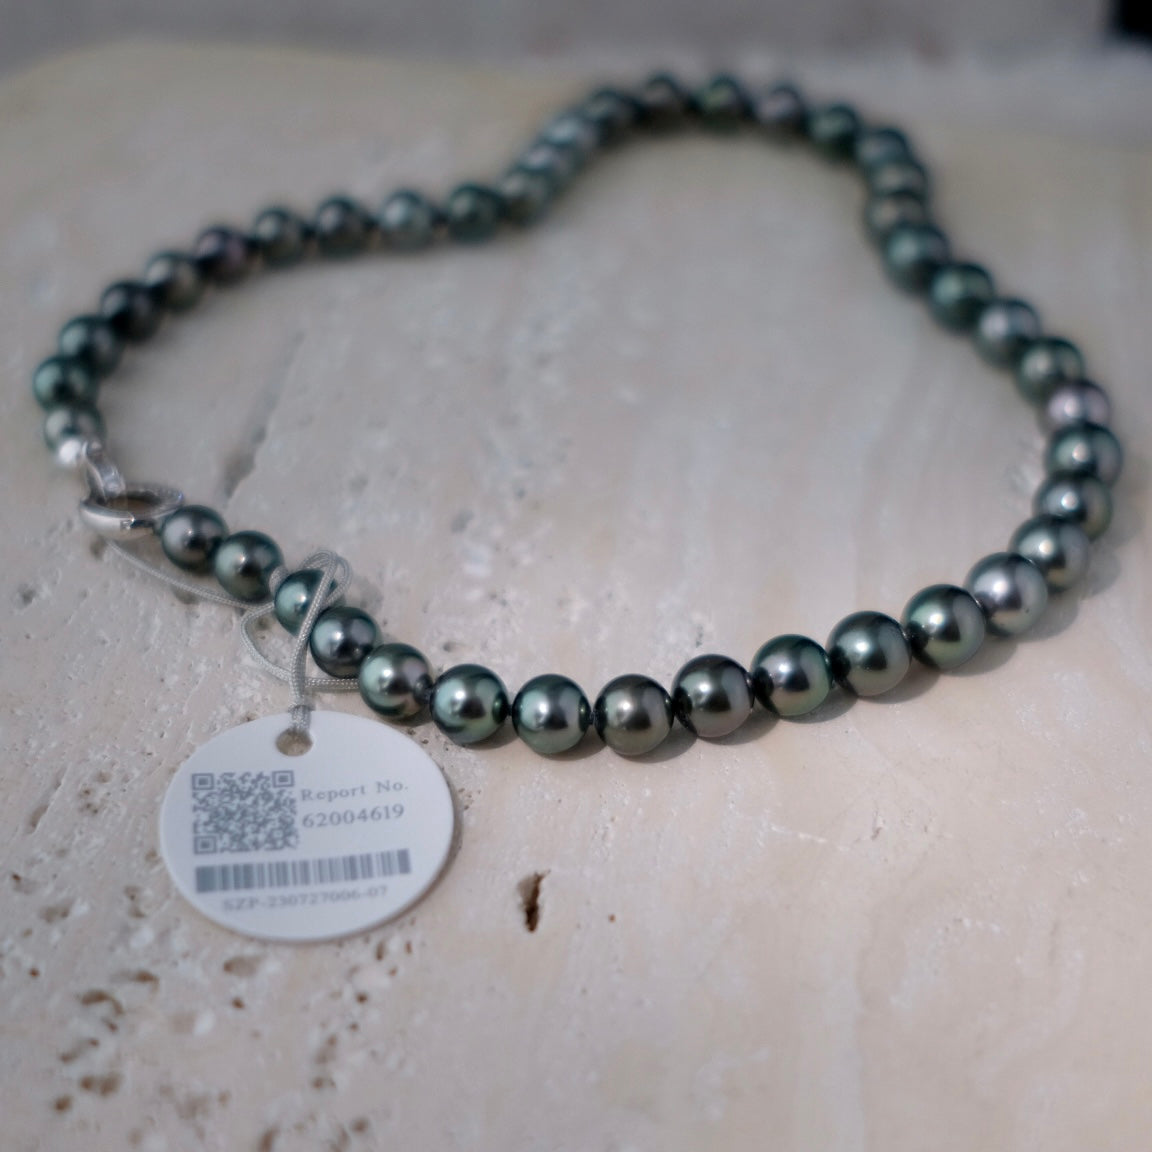 Tahitian Starla Necklace, 8.0-10.9mm, Pearl Necklace, GUILD Certificate